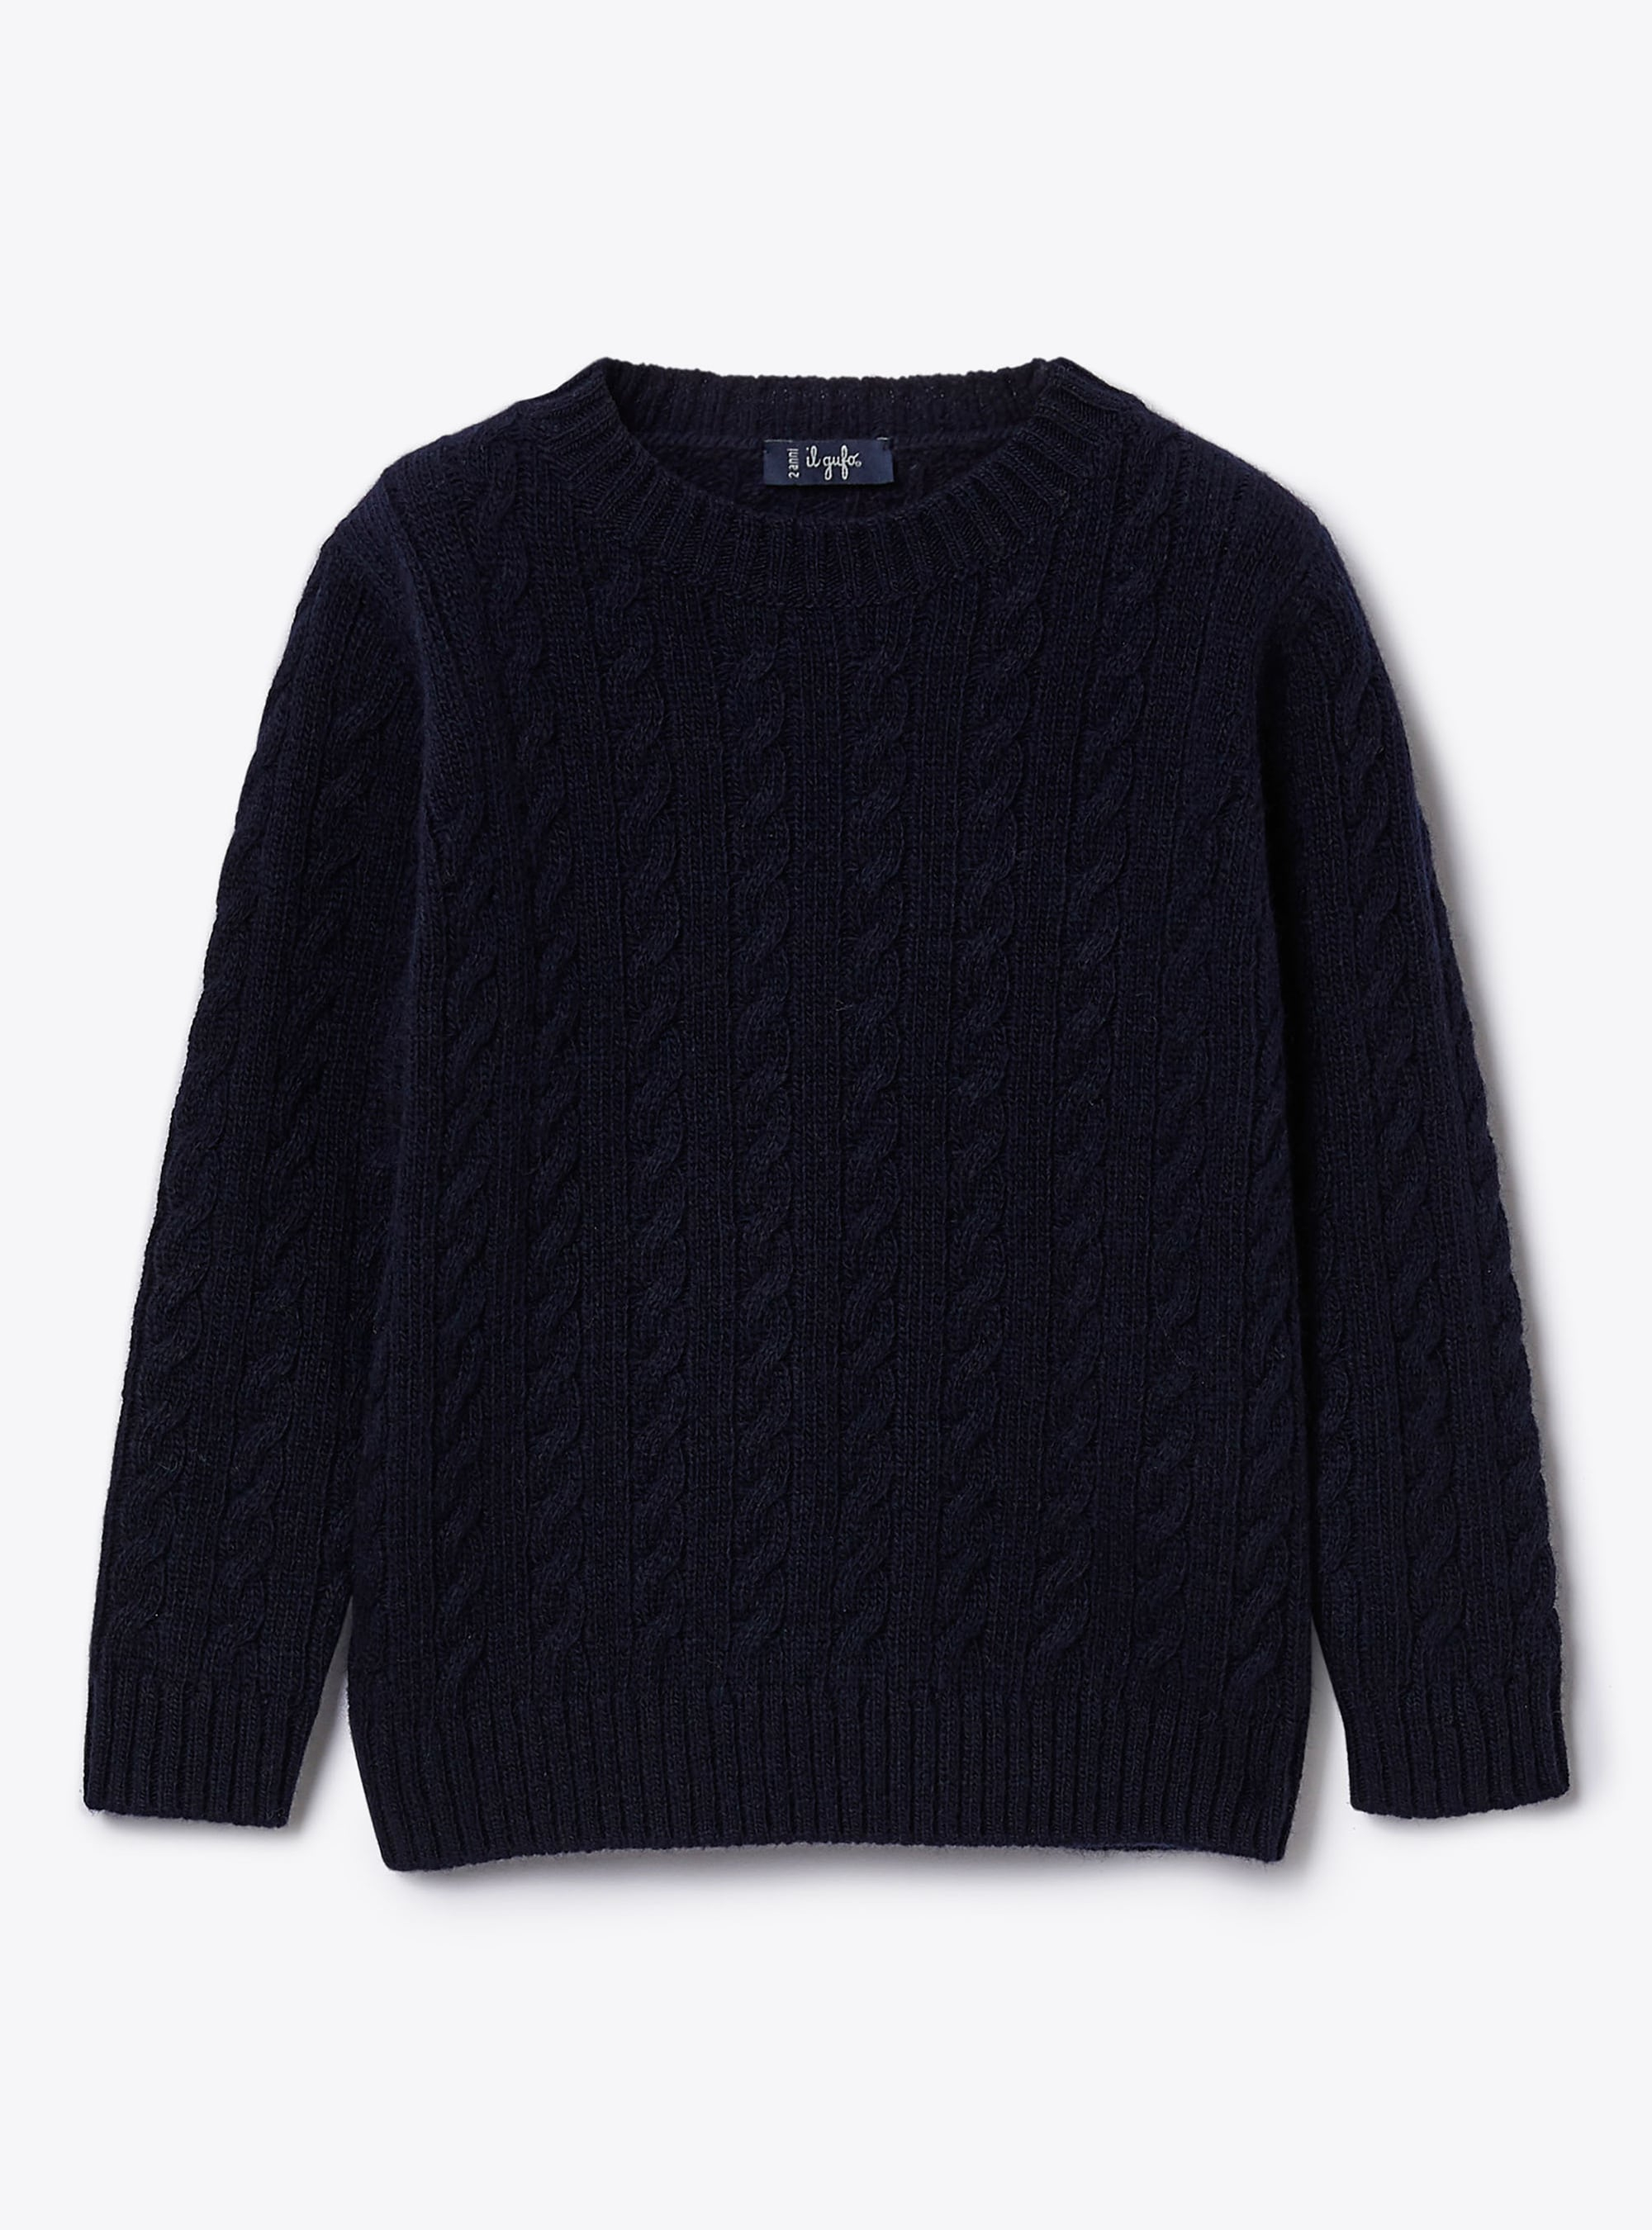 Navy cable knit wool sweater - Sweaters - Il Gufo